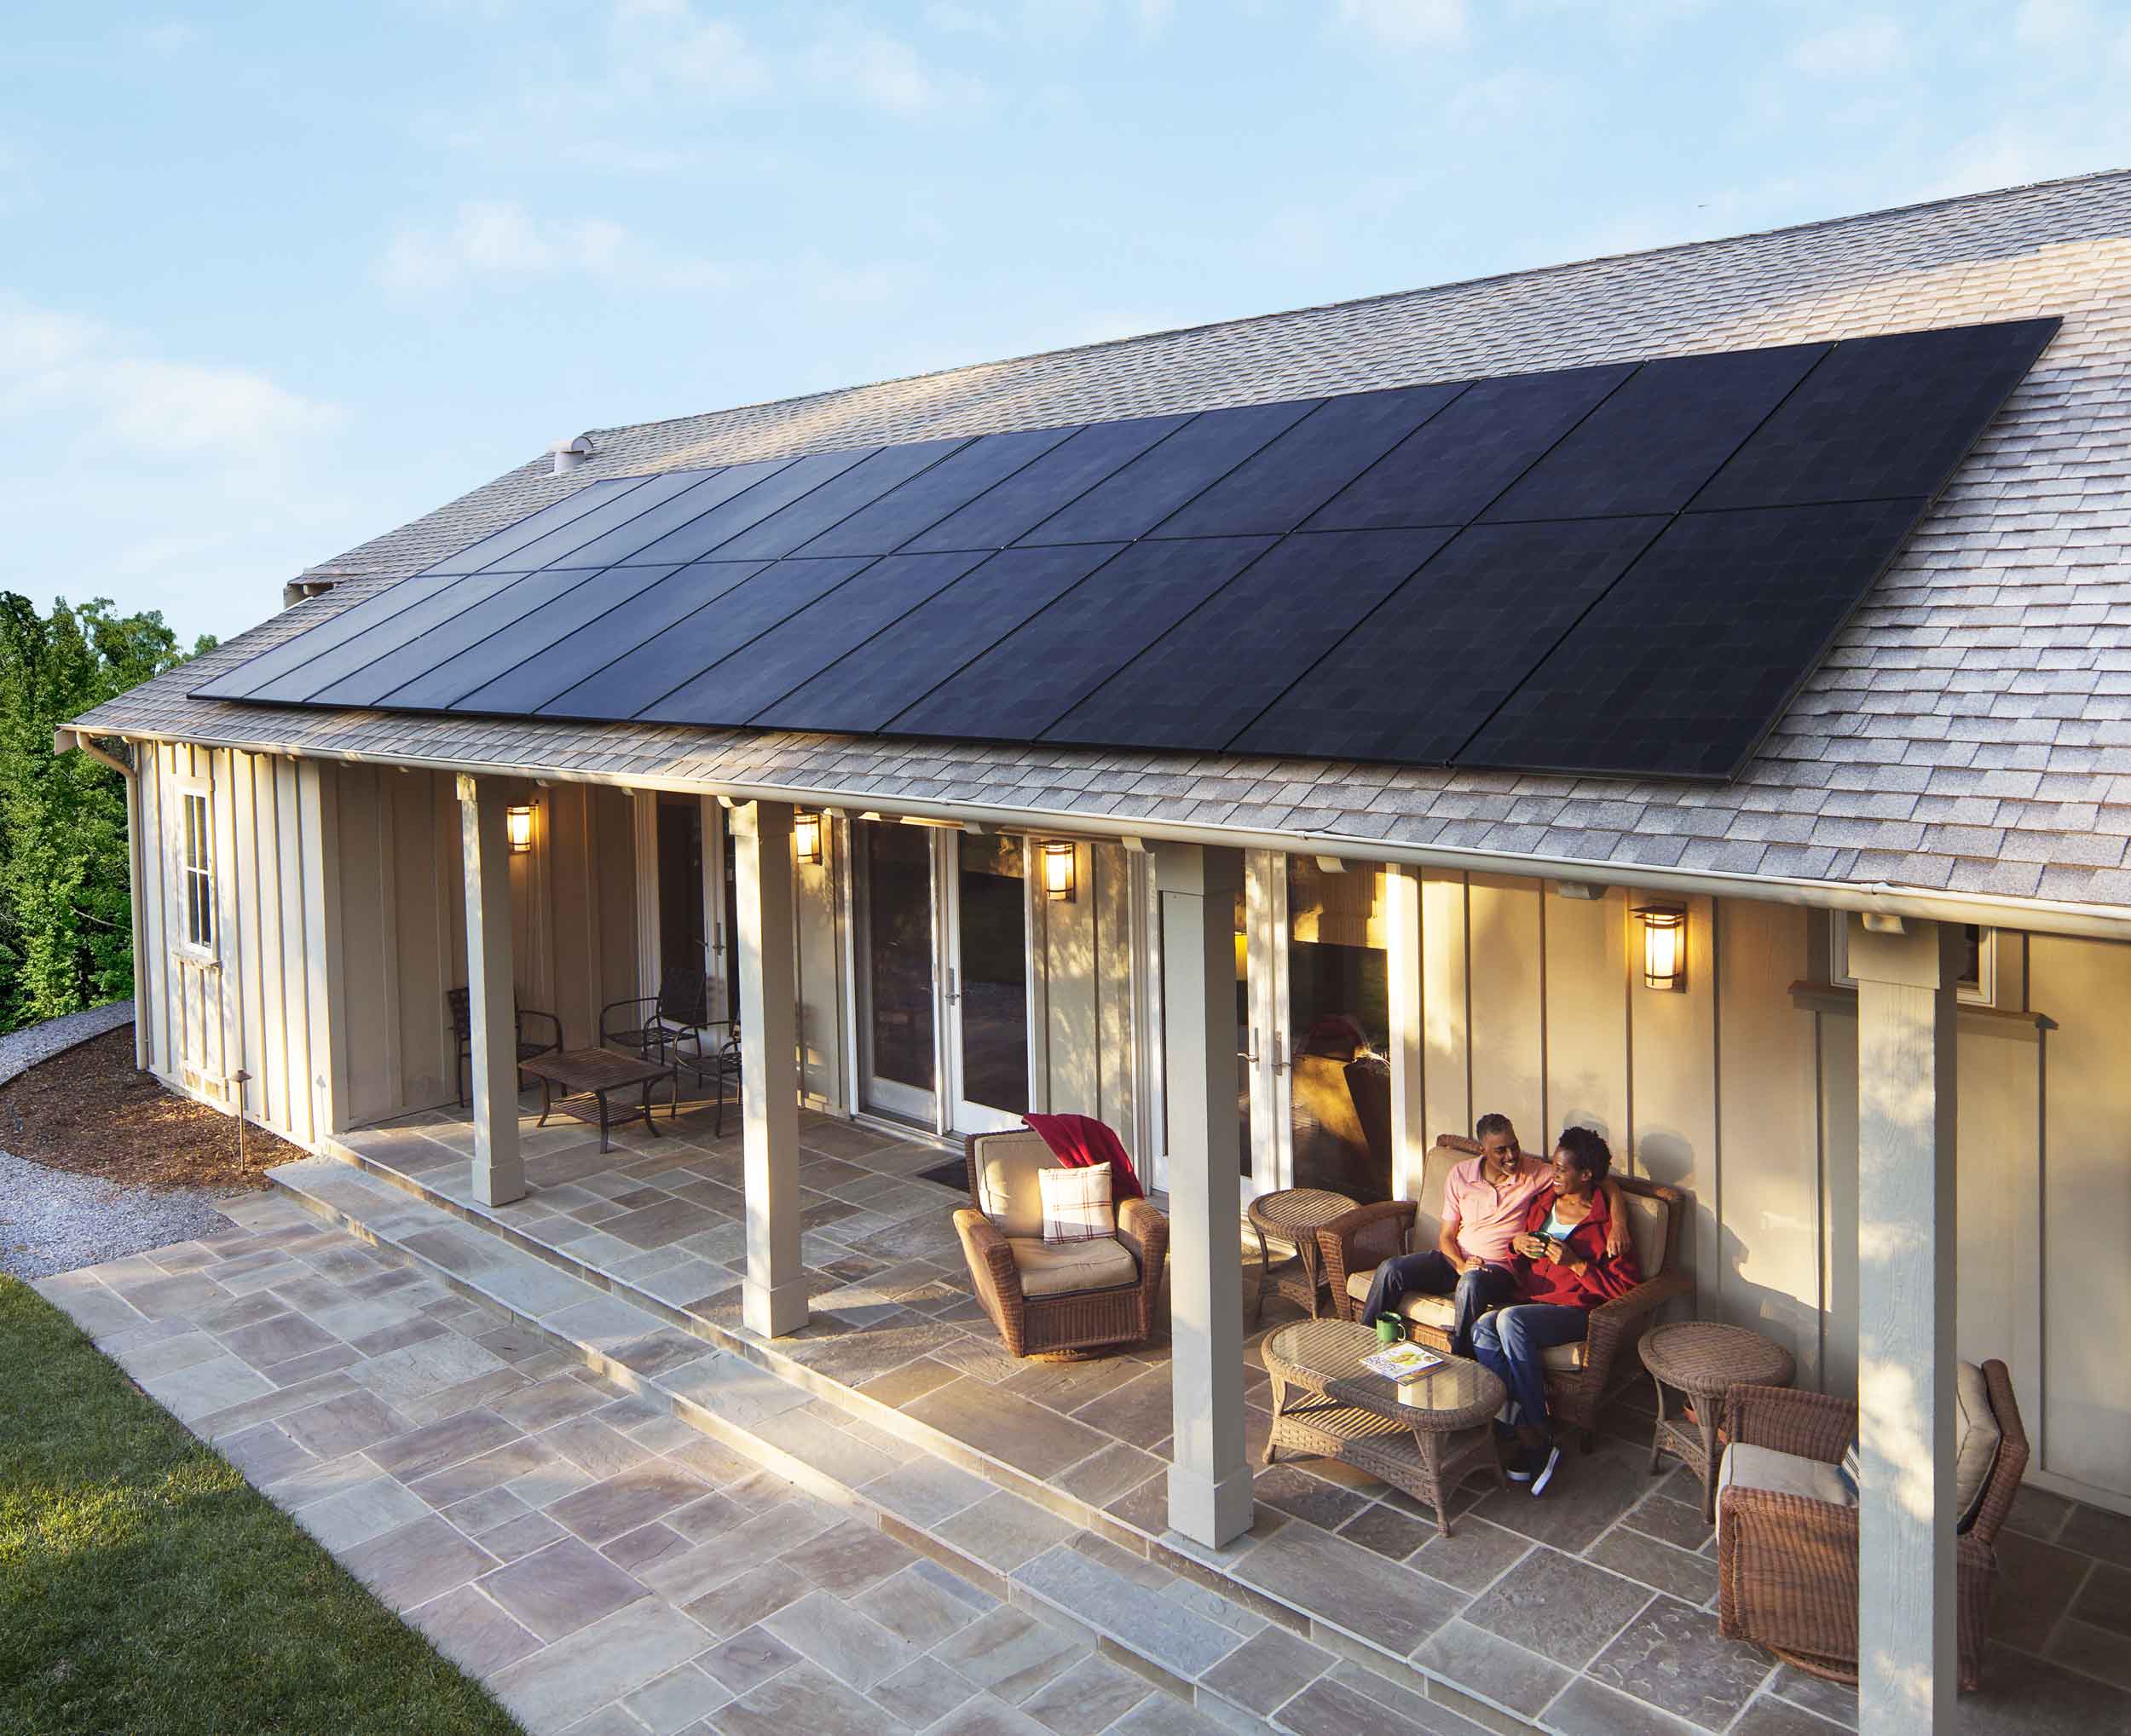 Couple sitting on porch of house with solar panels on roof